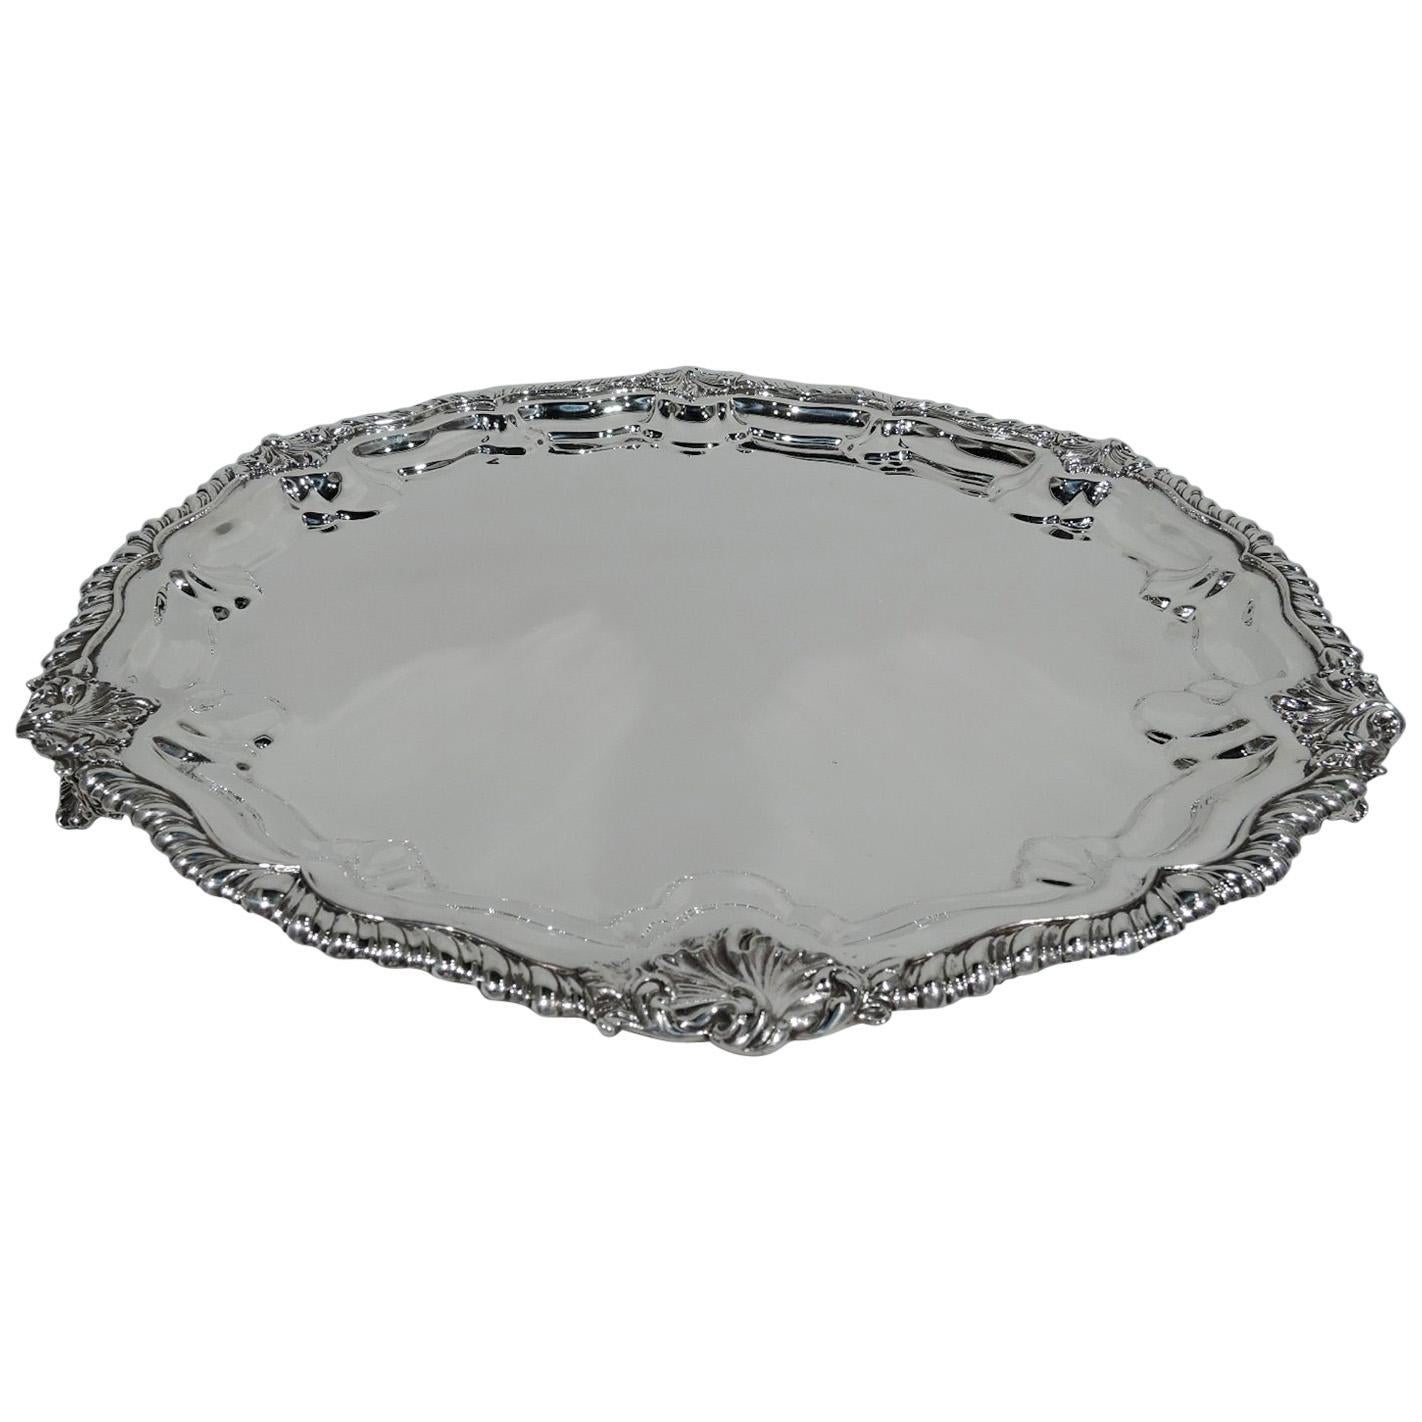 Antique Georgian Revival Sterling Silver Salver Tray by New York Maker